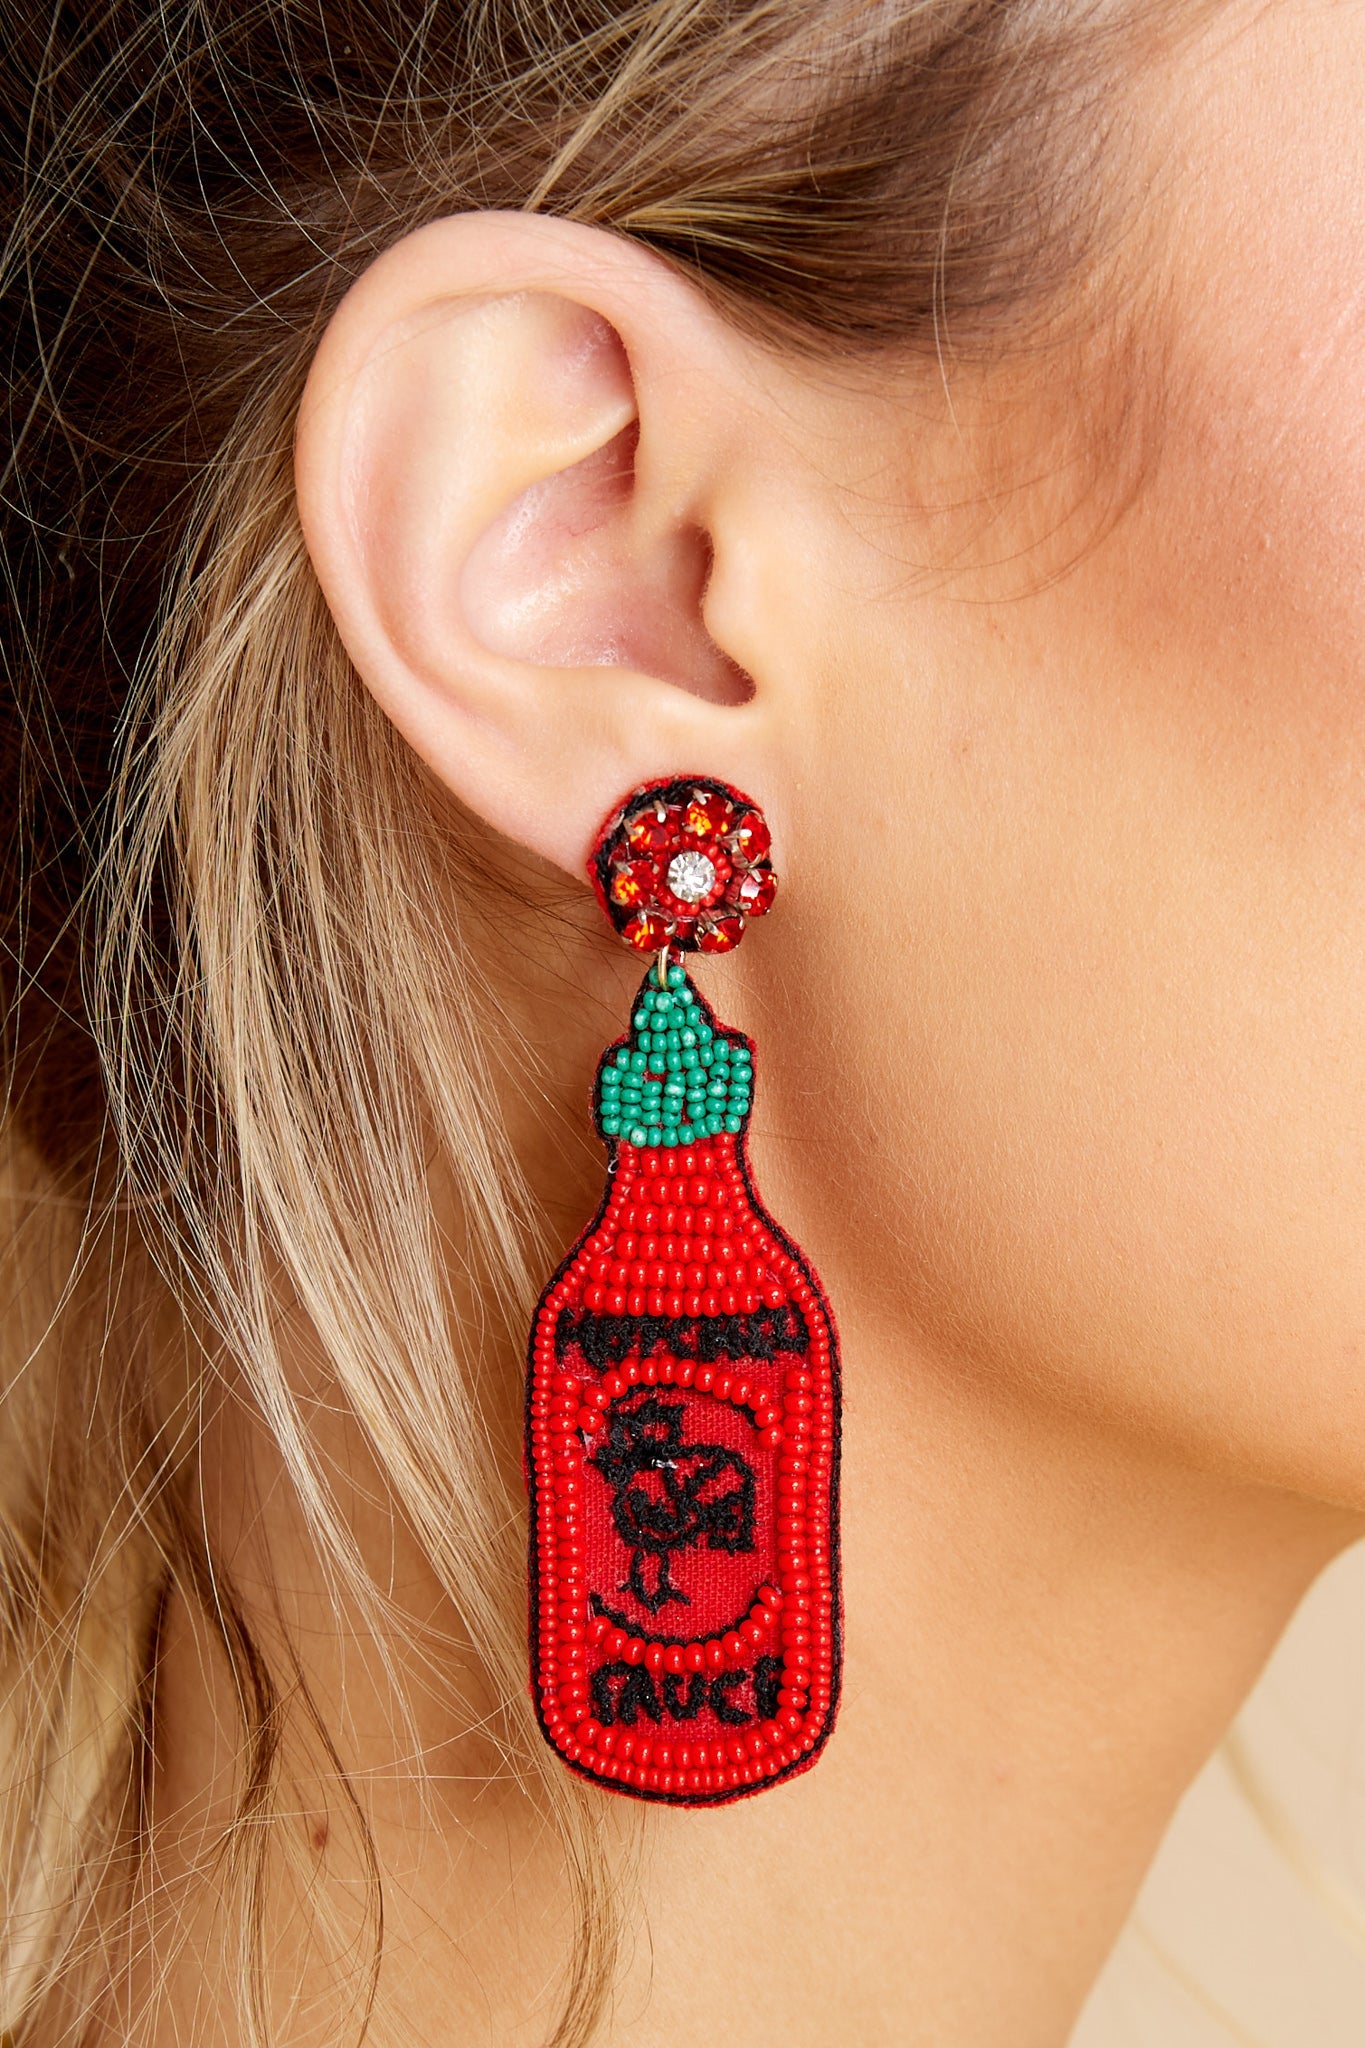 Bring The Heat Red Beaded Earrings - Red Dress